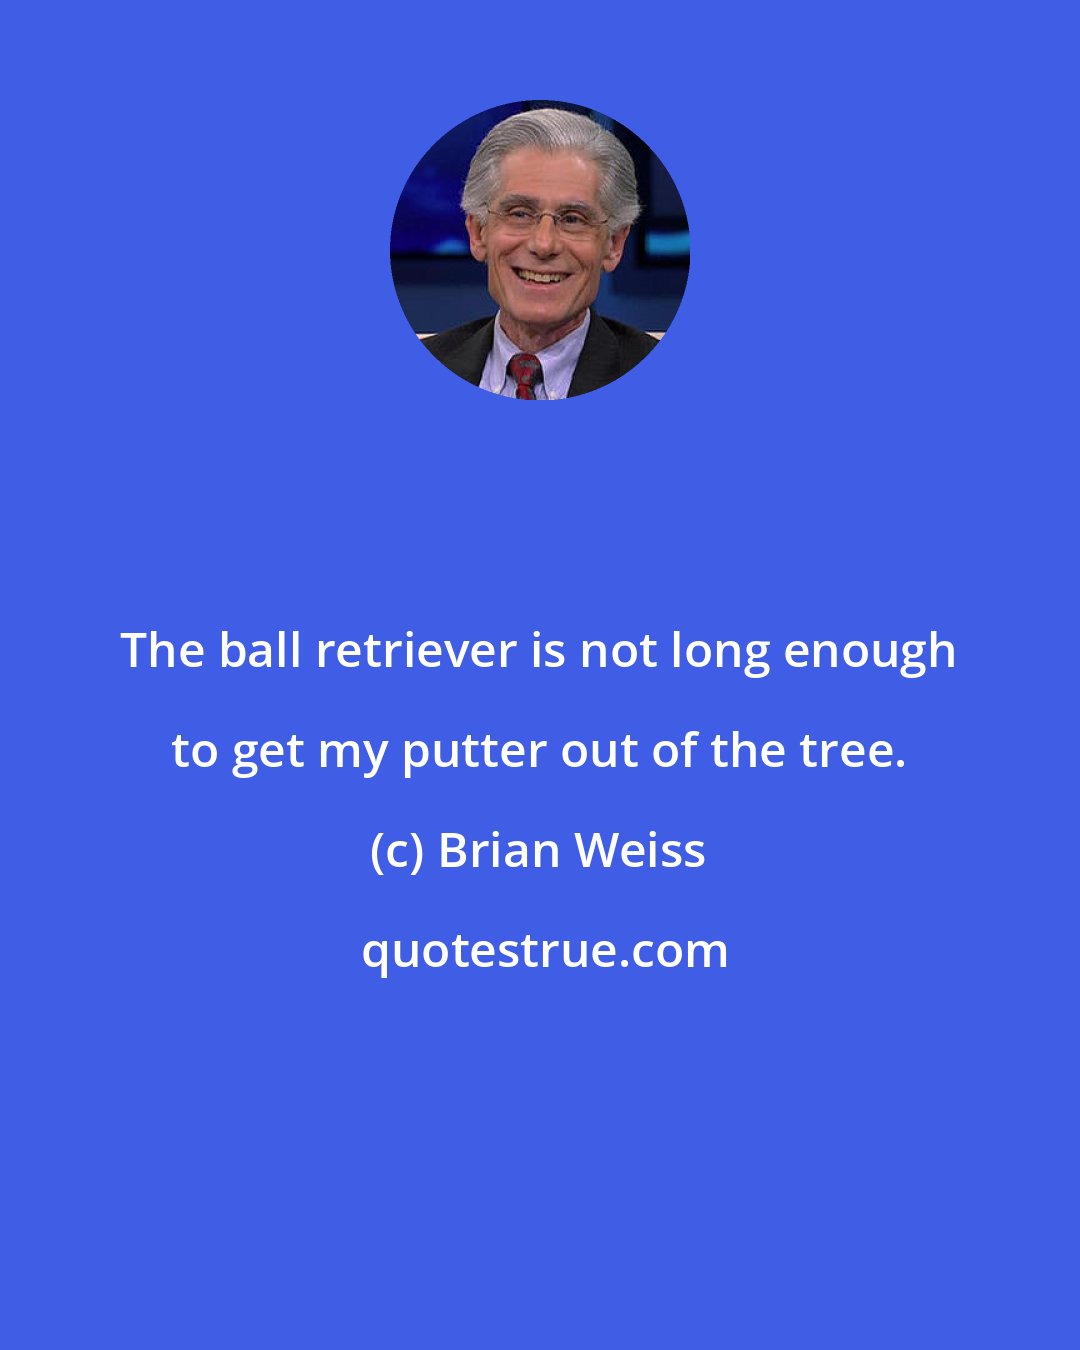 Brian Weiss: The ball retriever is not long enough to get my putter out of the tree.